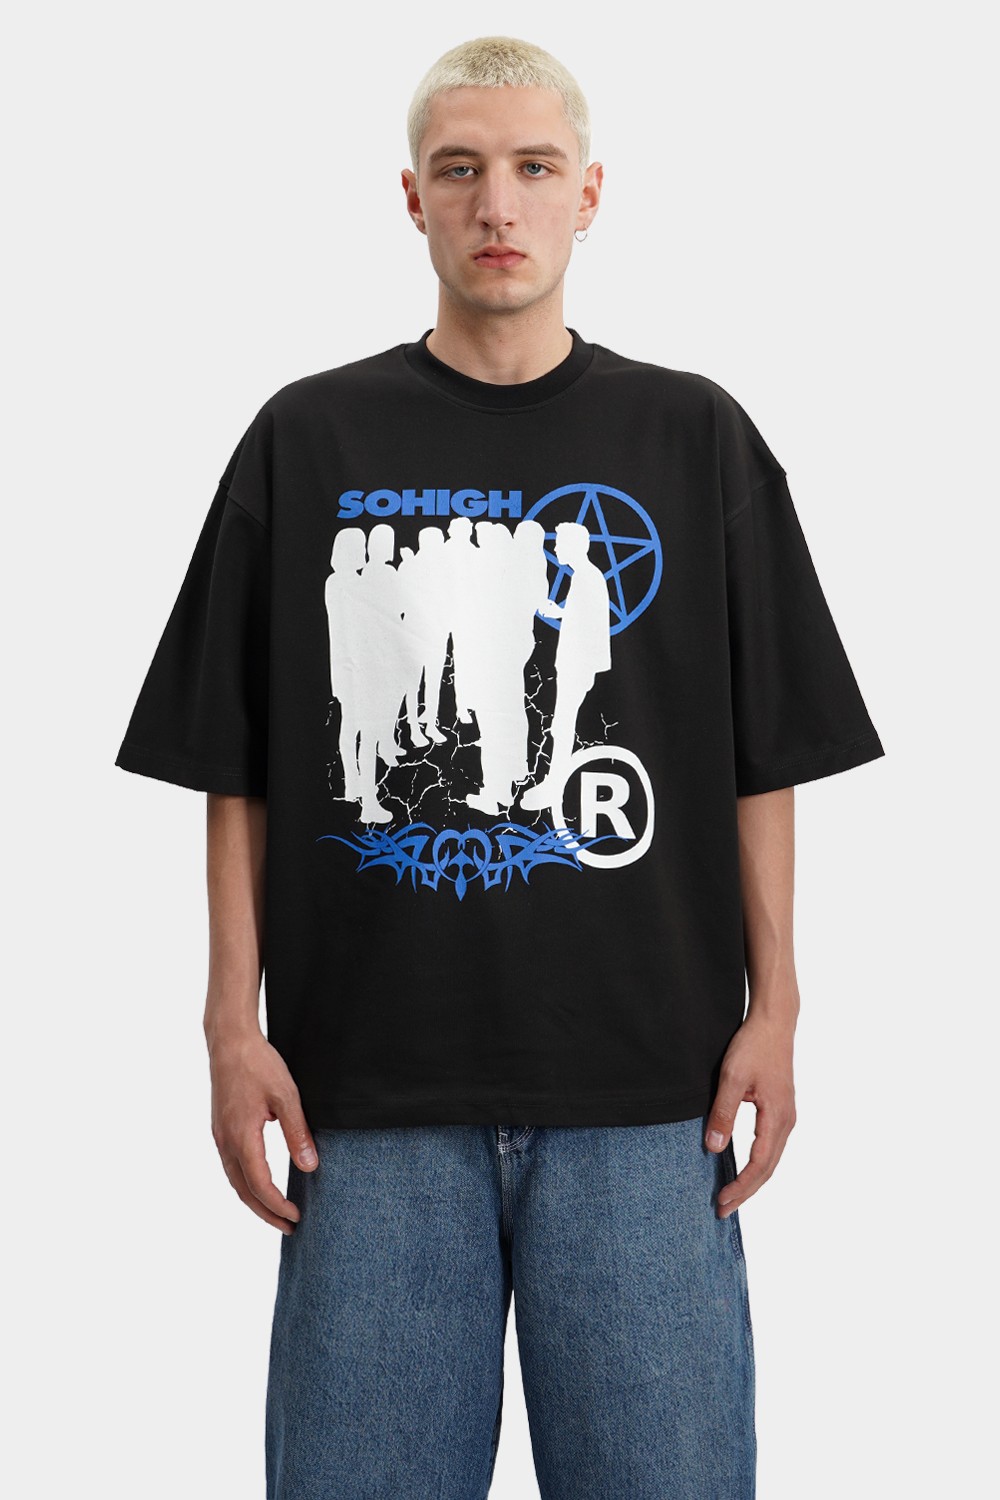 Sohigh People Archive T-Shirt (SHT-17)